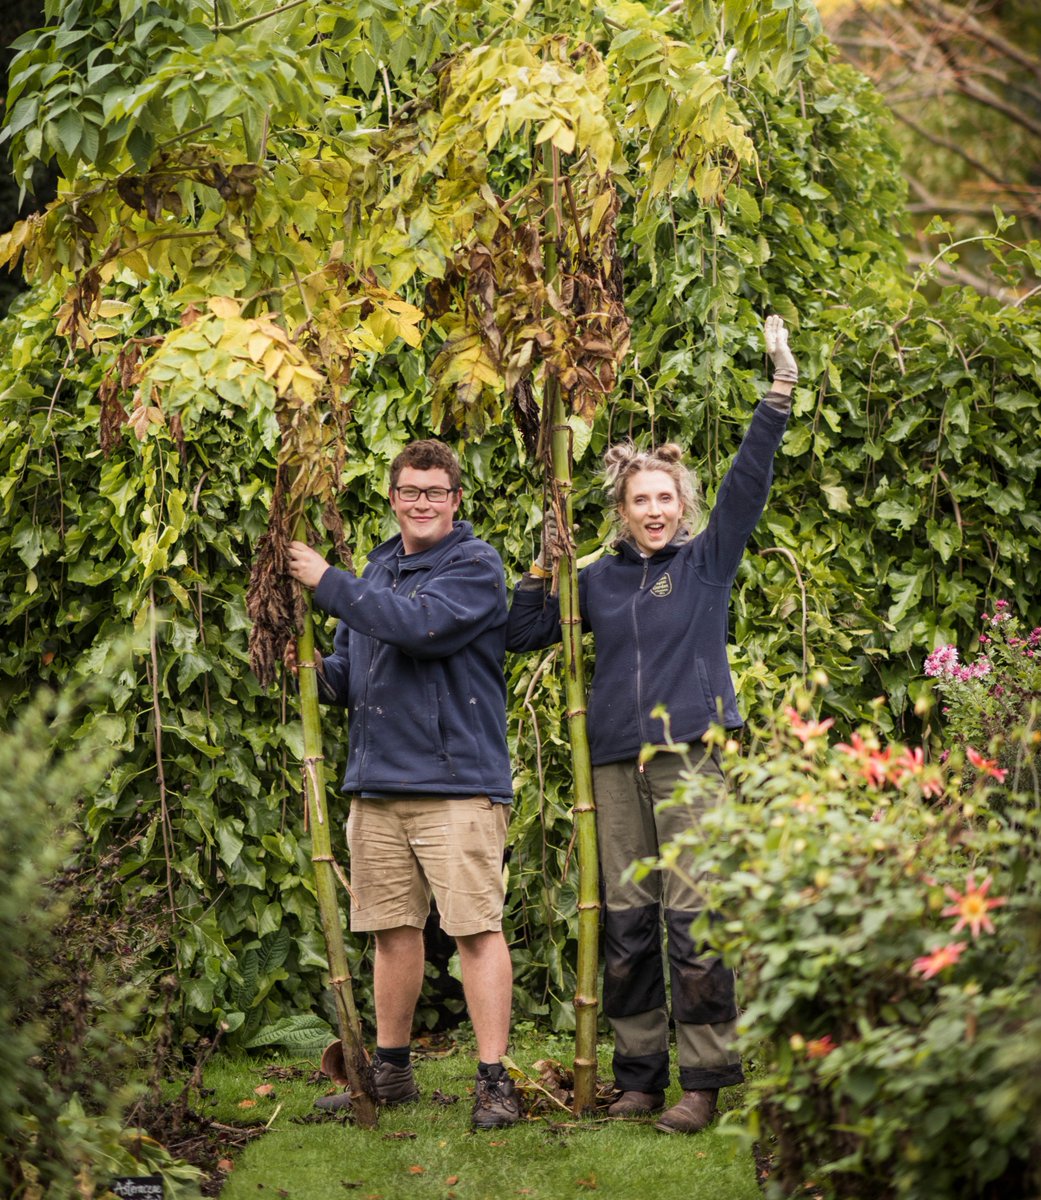 Love plants and gardening? We're looking for a Horticultural Trainee - no previous gardening experience needed. Made possible with @HeritageFundUK as part of our Glasshouse Restoration project. Open day Thursday 27 January. ow.ly/C83R50HxS0C #HeritageFund